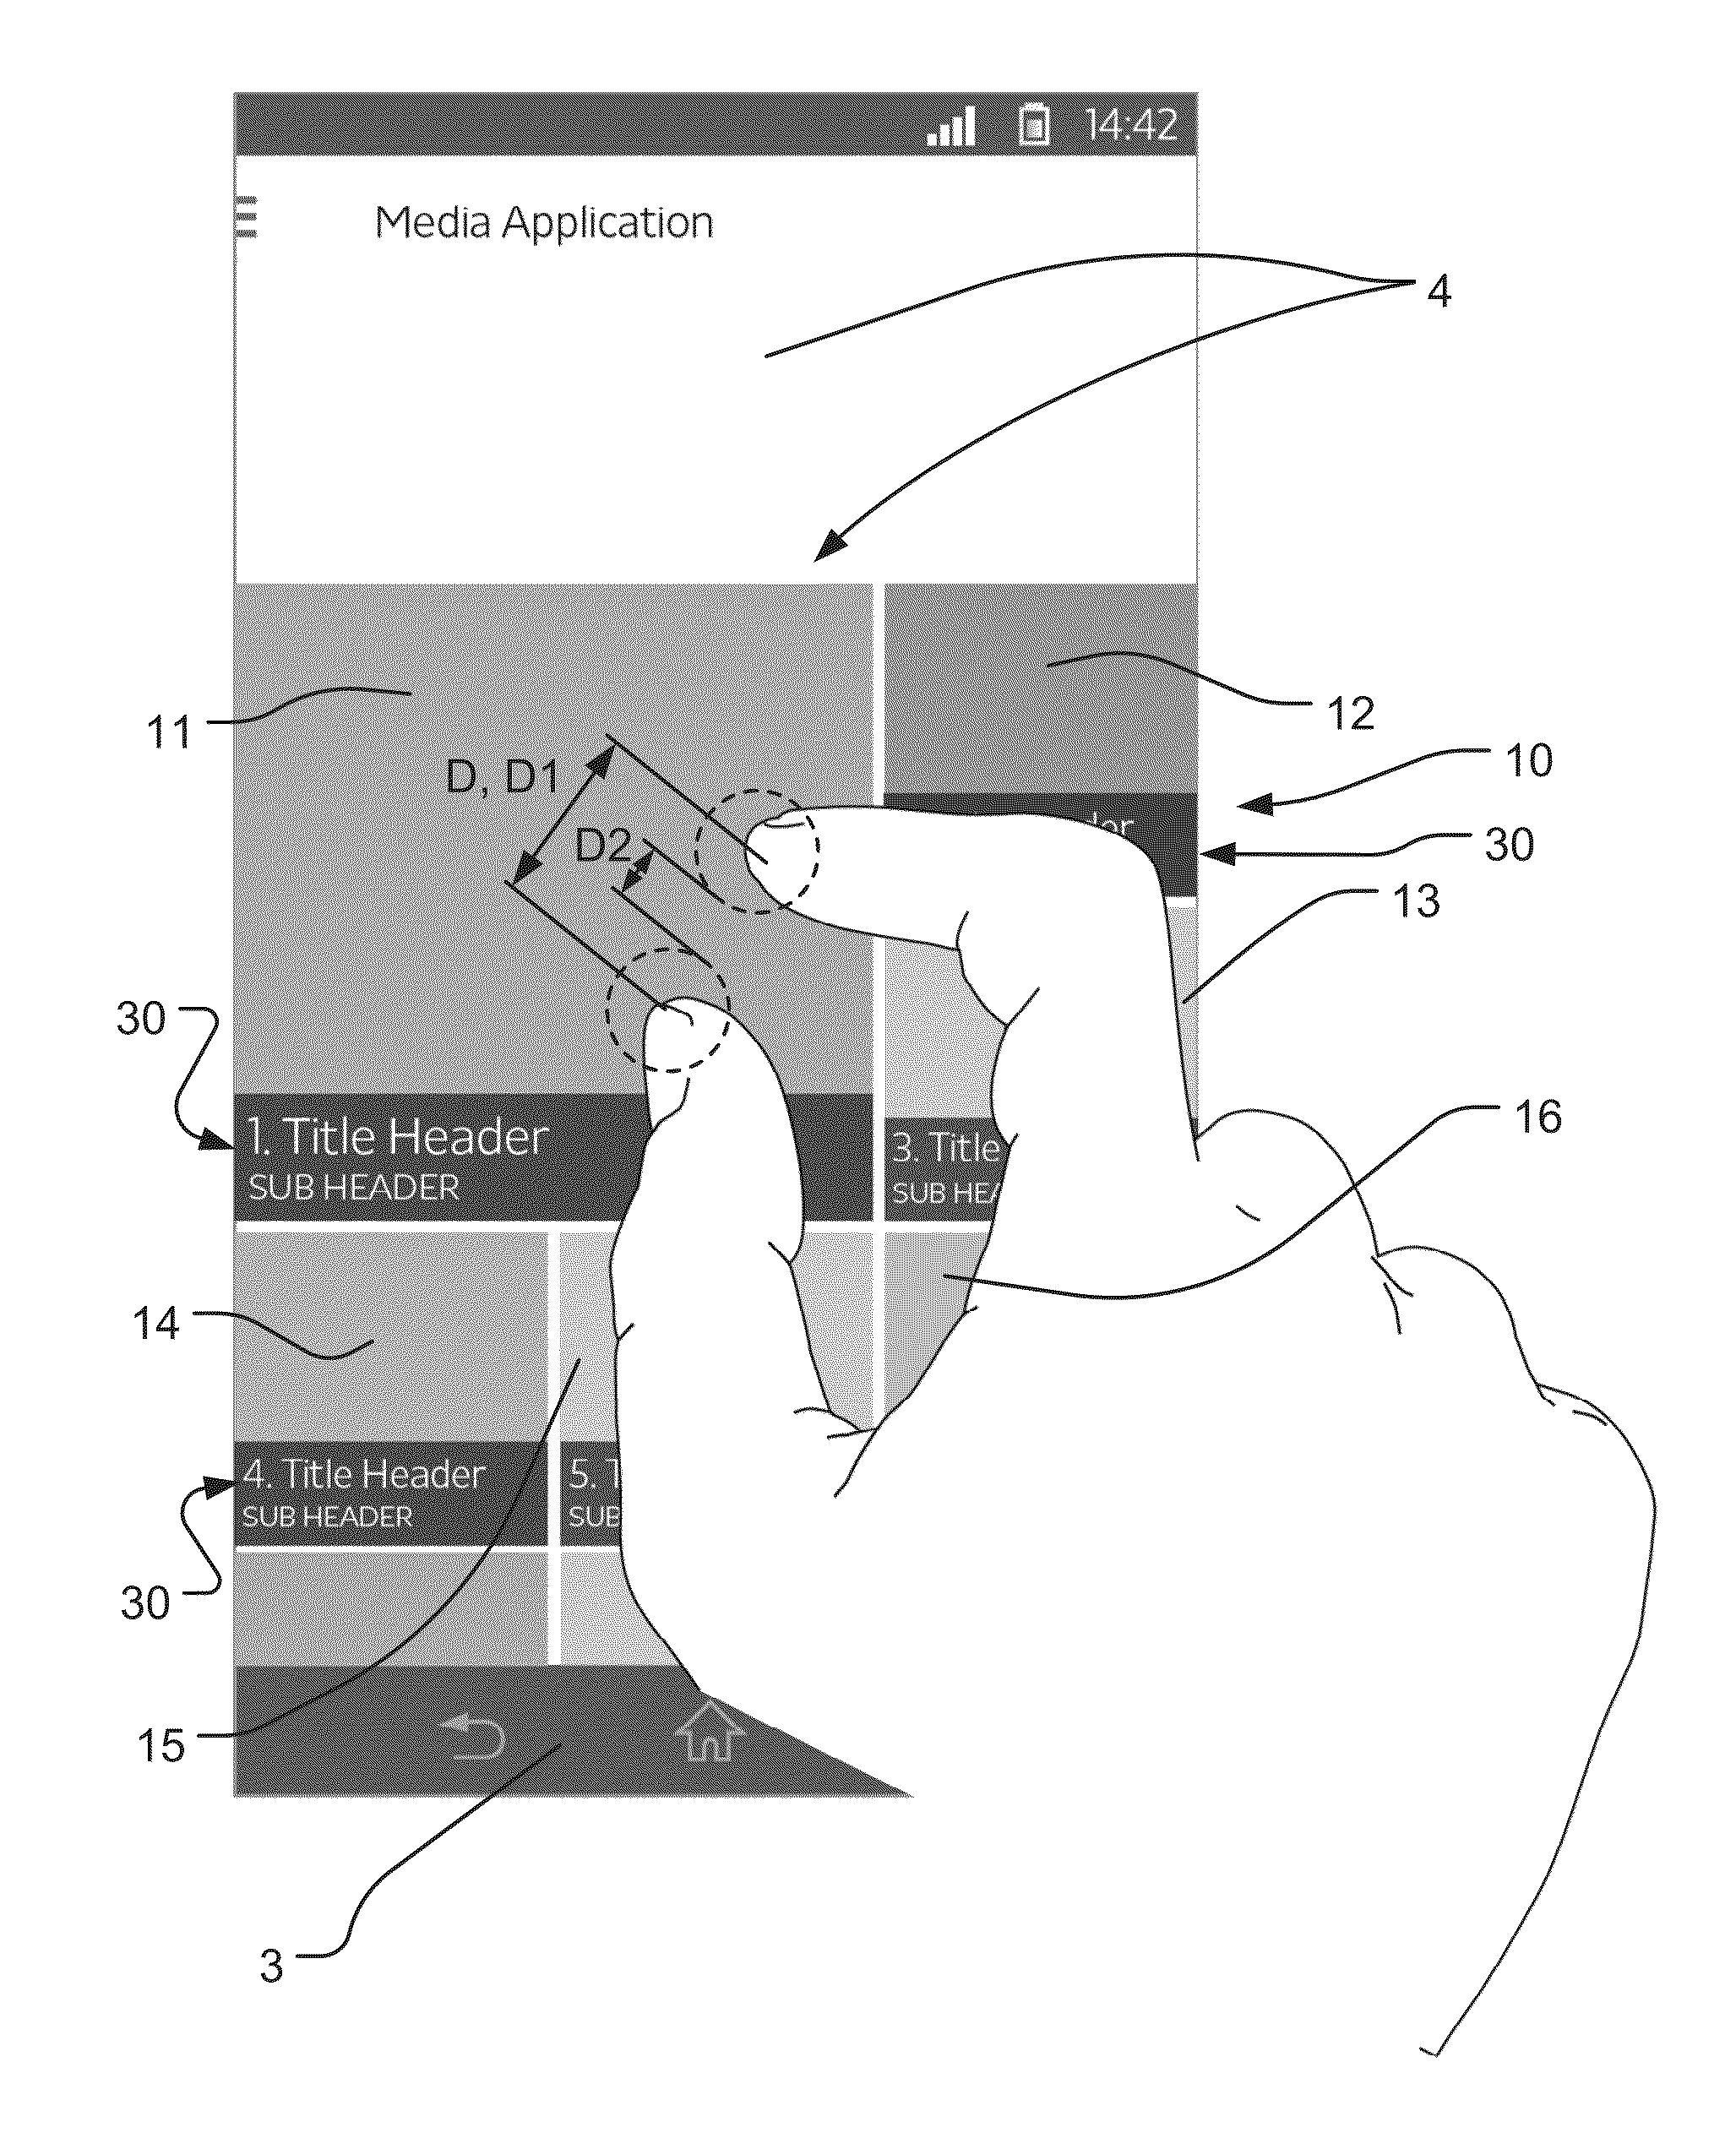 Method of controlling a graphical user interface for a mobile electronic device